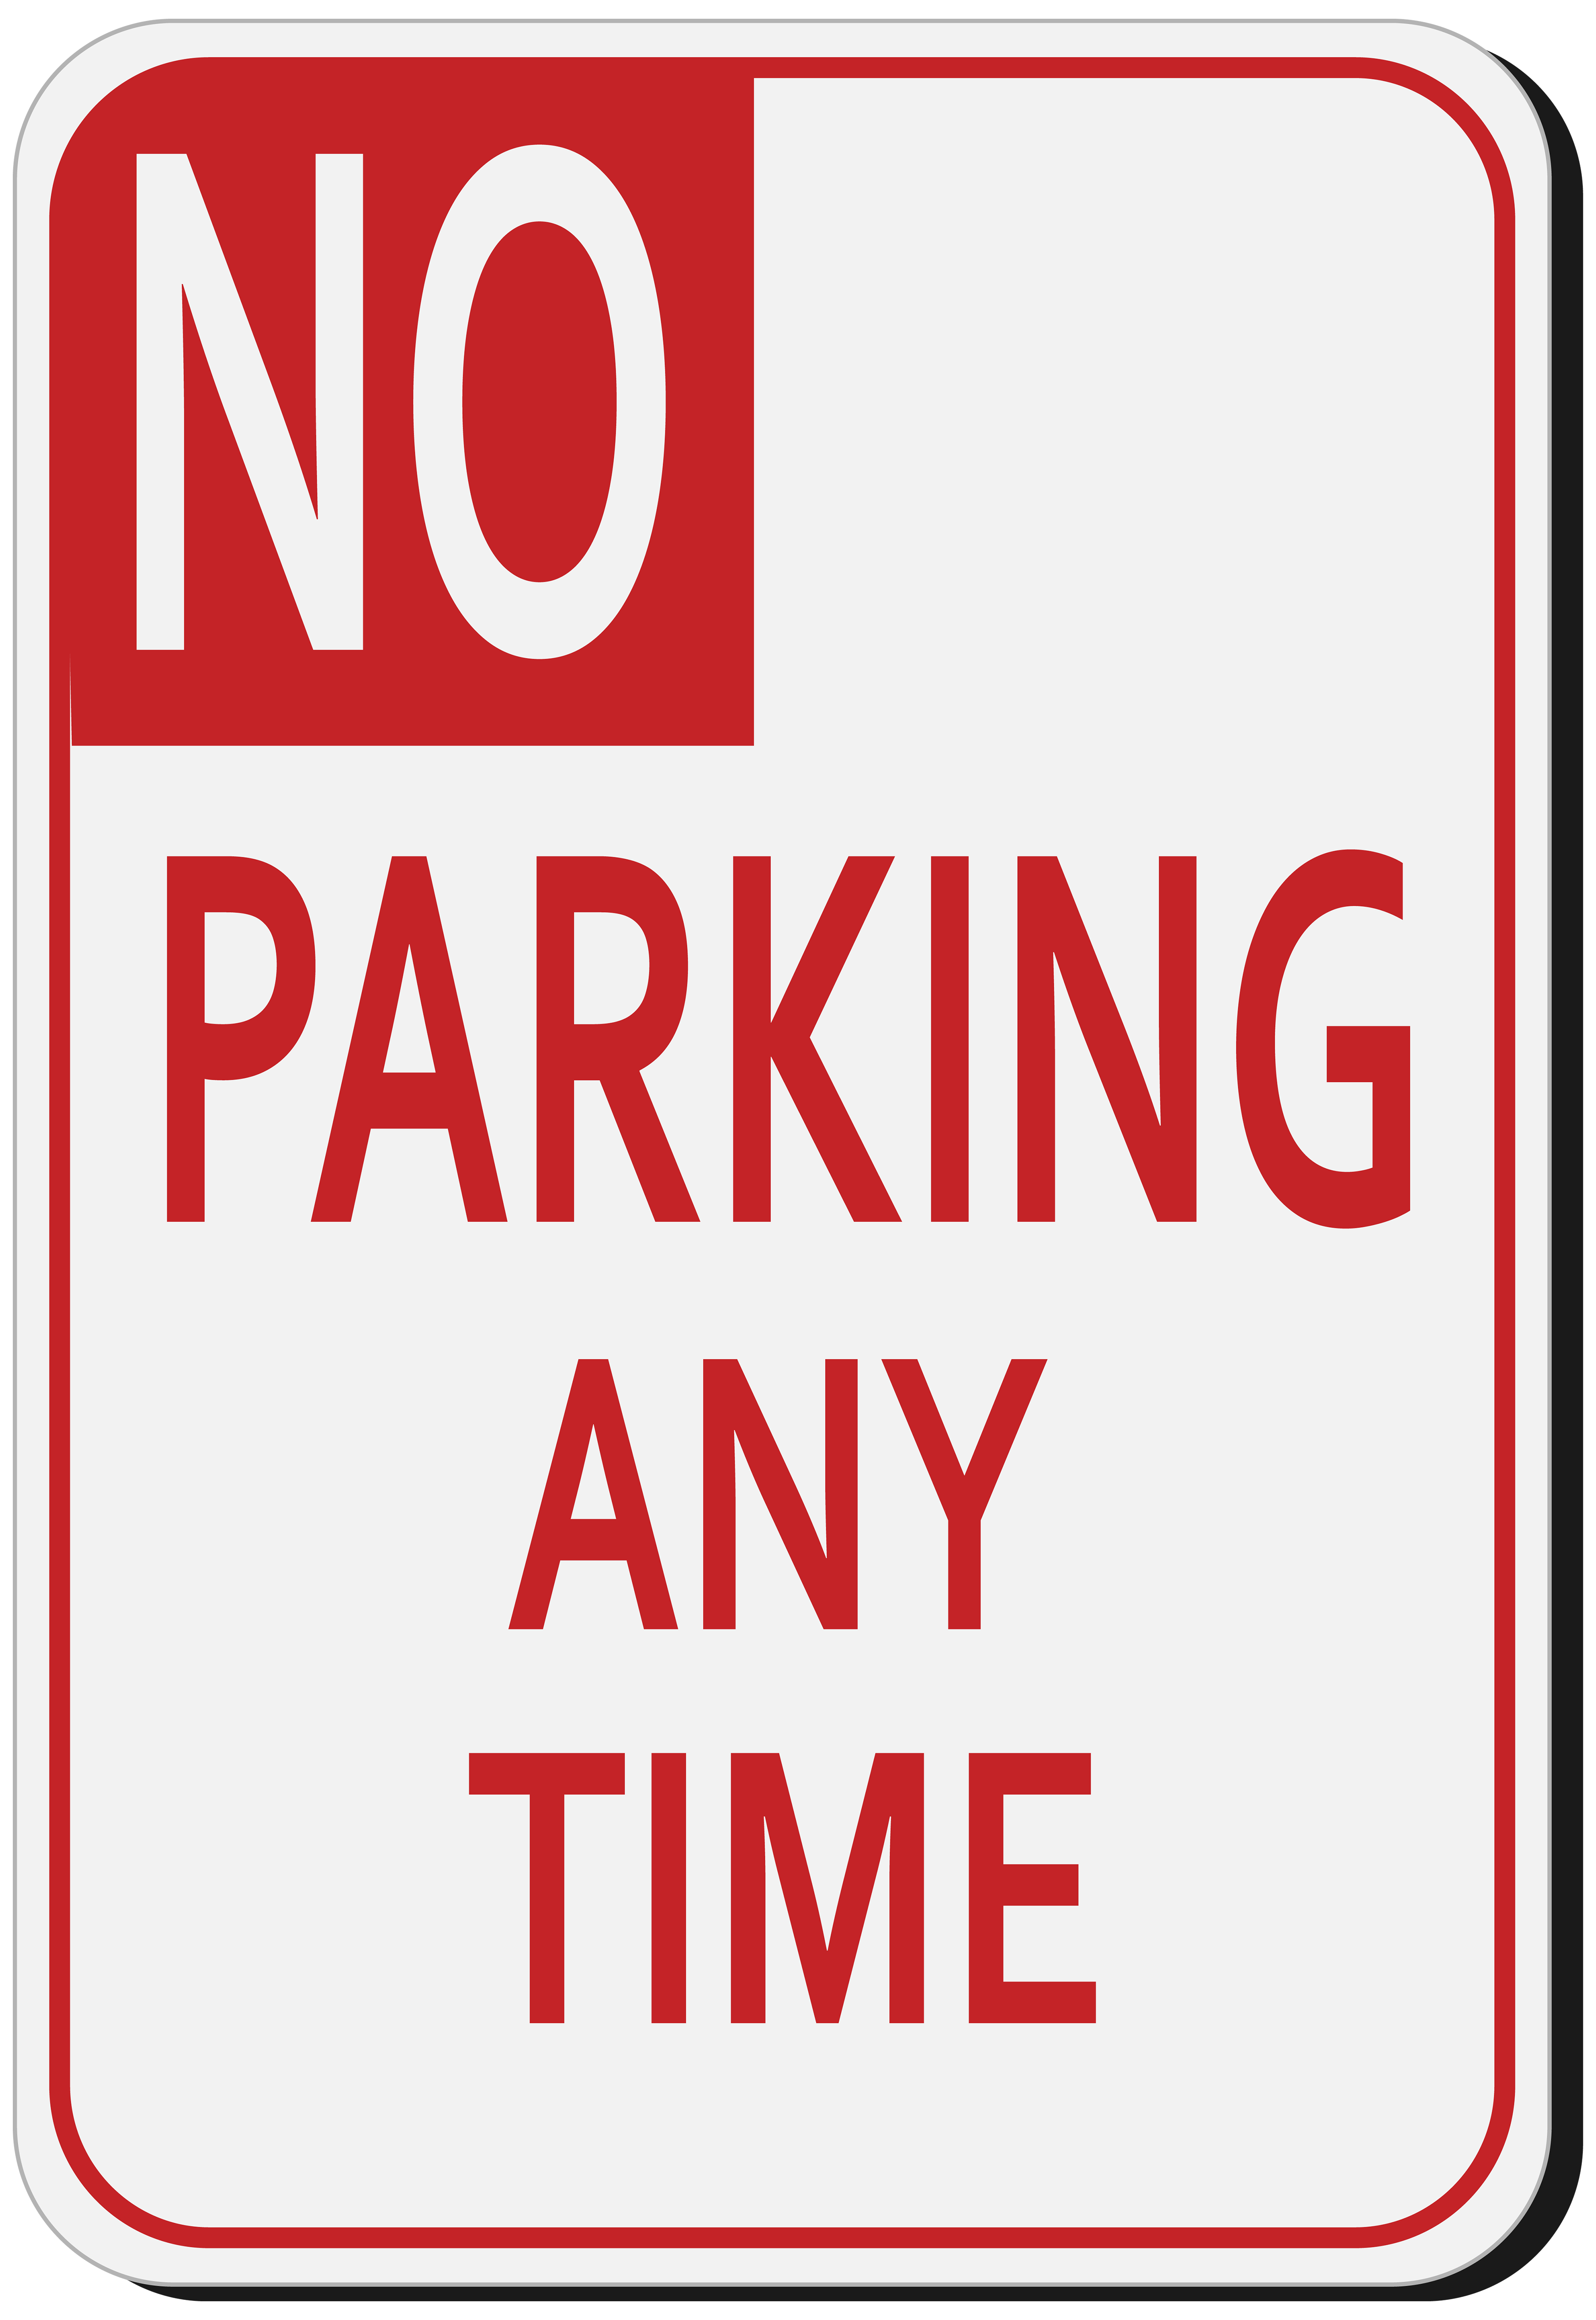 Free no parking clipart